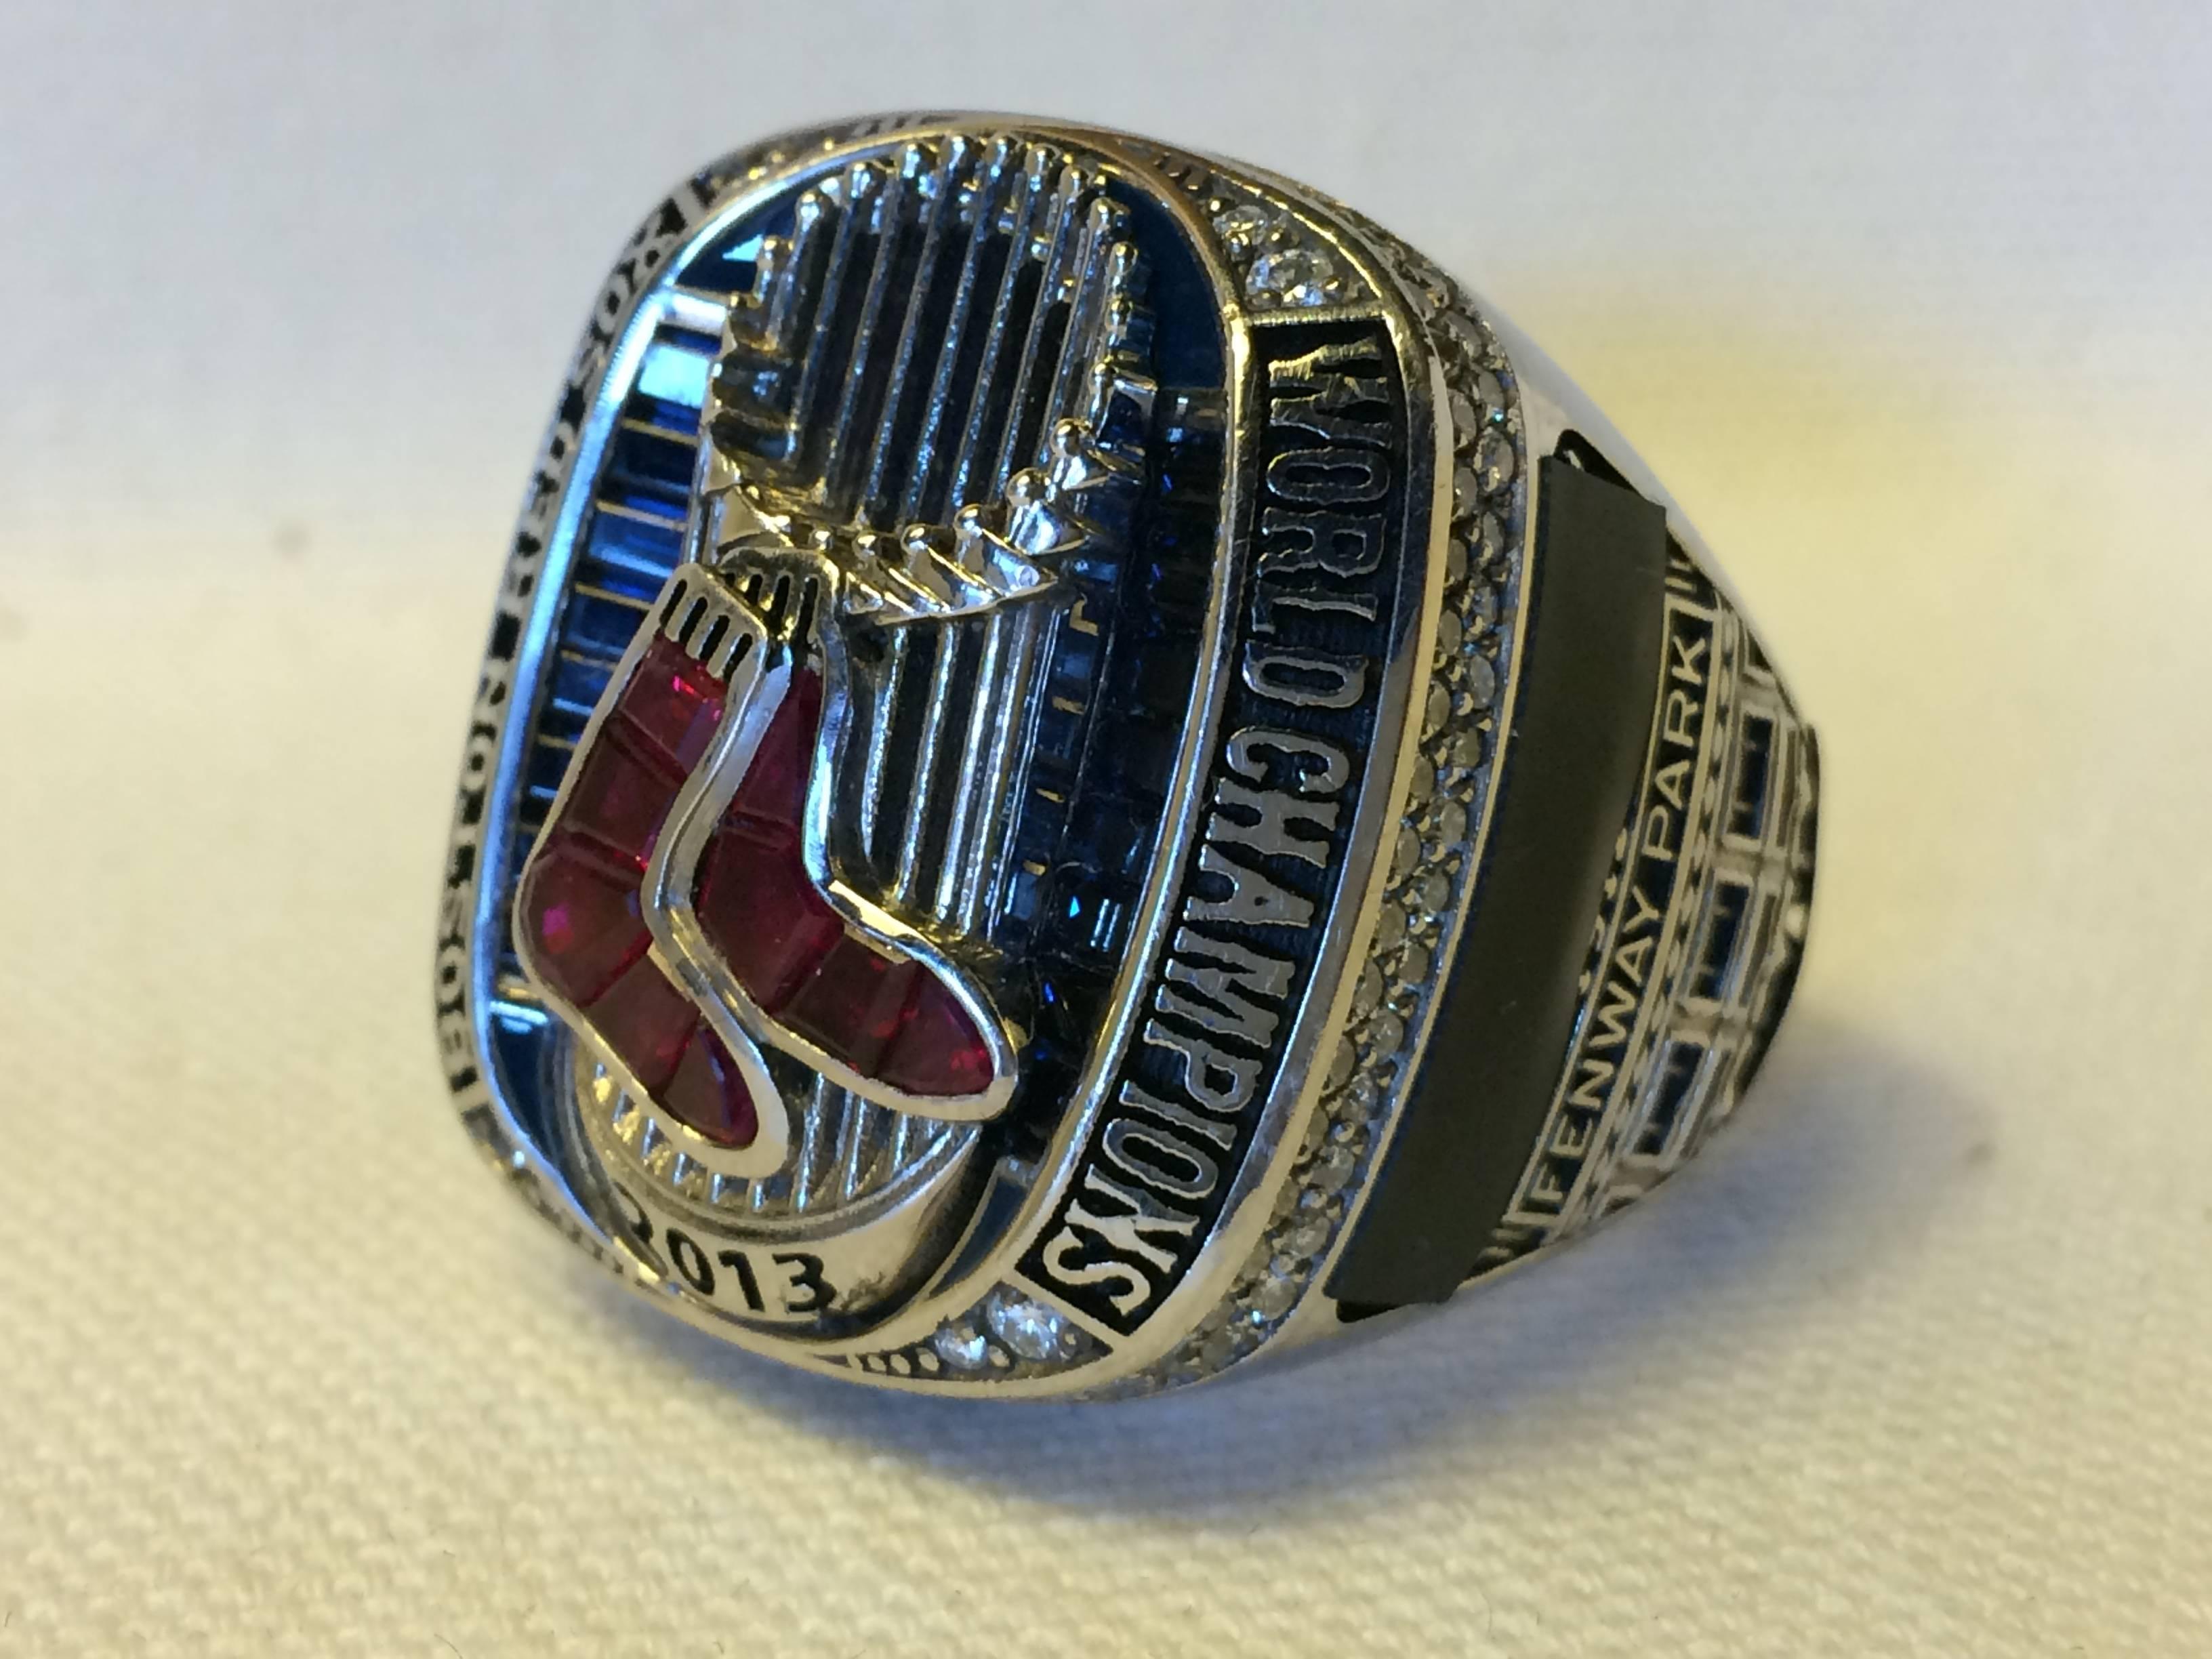 2013 Boston Red Sox World Series Championship ring. Coaching staff members ring, size 10.5-11, weight 58.8 grams. All REAL genuine diamonds over 126 total diamonds, brilliant cut, si gh color. Genuine real rubies, 2.5 carets custom cut, 16